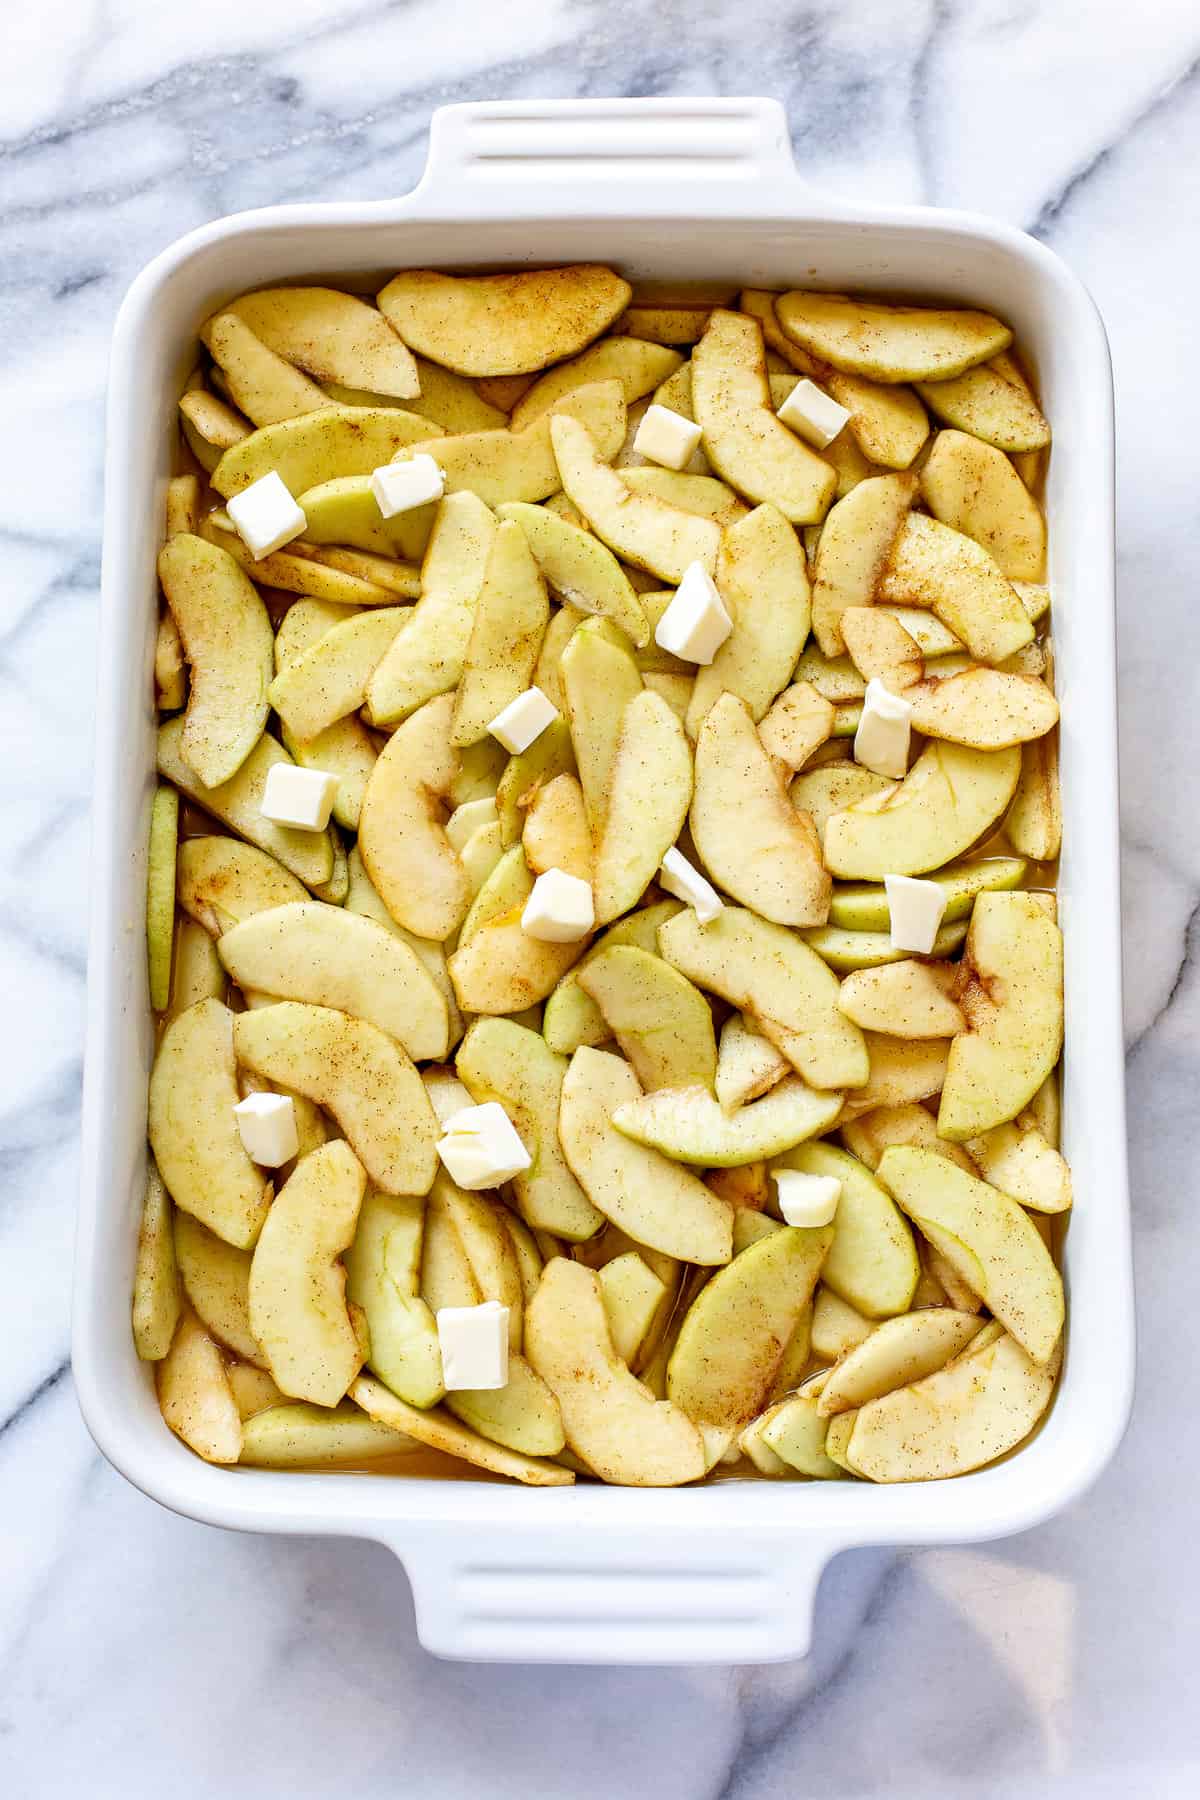 A casserole dish filled with apples, apple cider and small chunks of butter